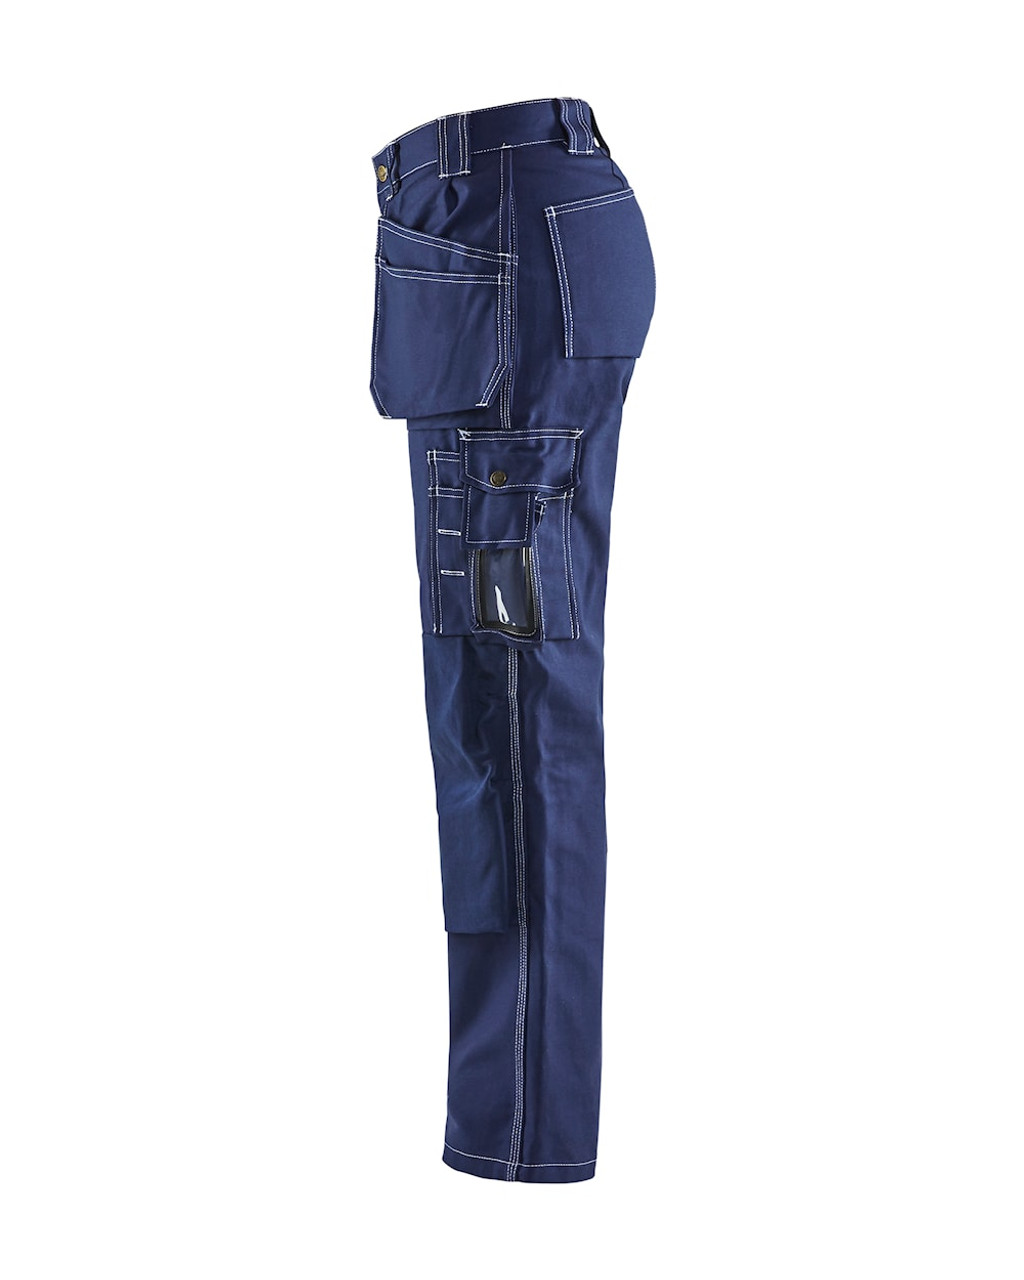 BLAKLADER Womens Trousers | Work Trousers for Carpentry, Womens Trousers in Melbourne and Perth.